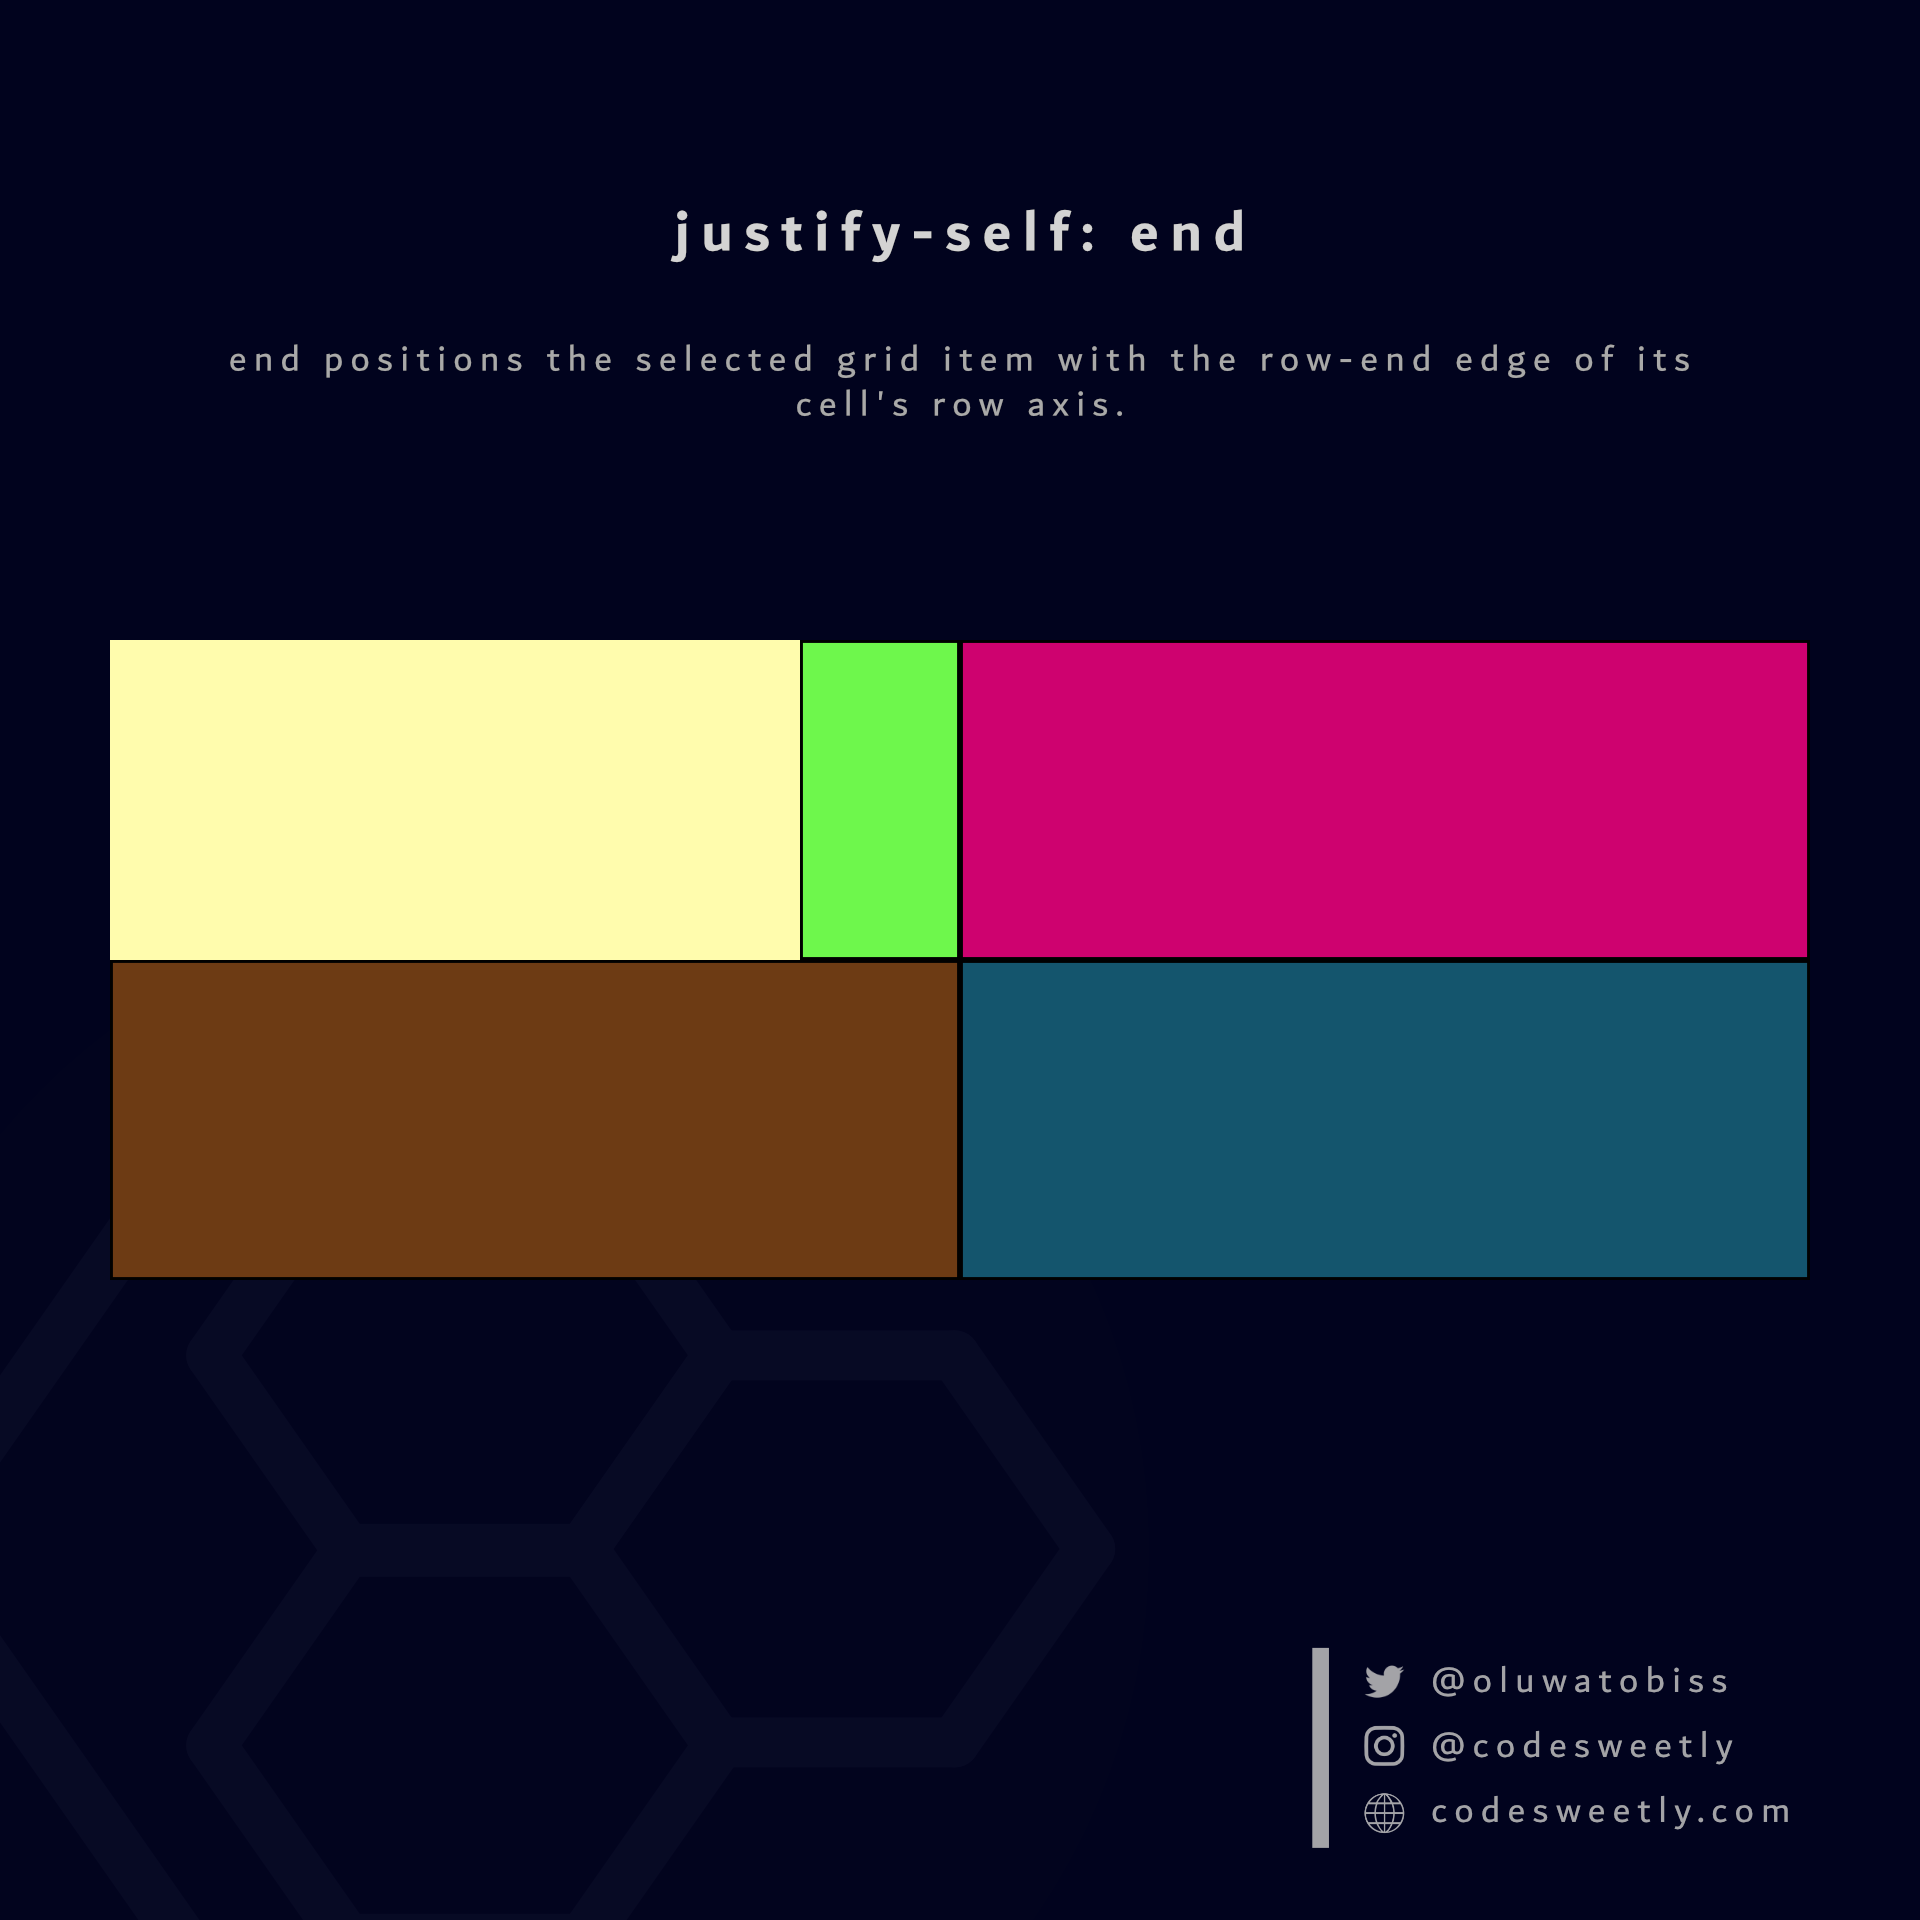 justify-self's end value positions the selected grid item to its cell's row-end edge